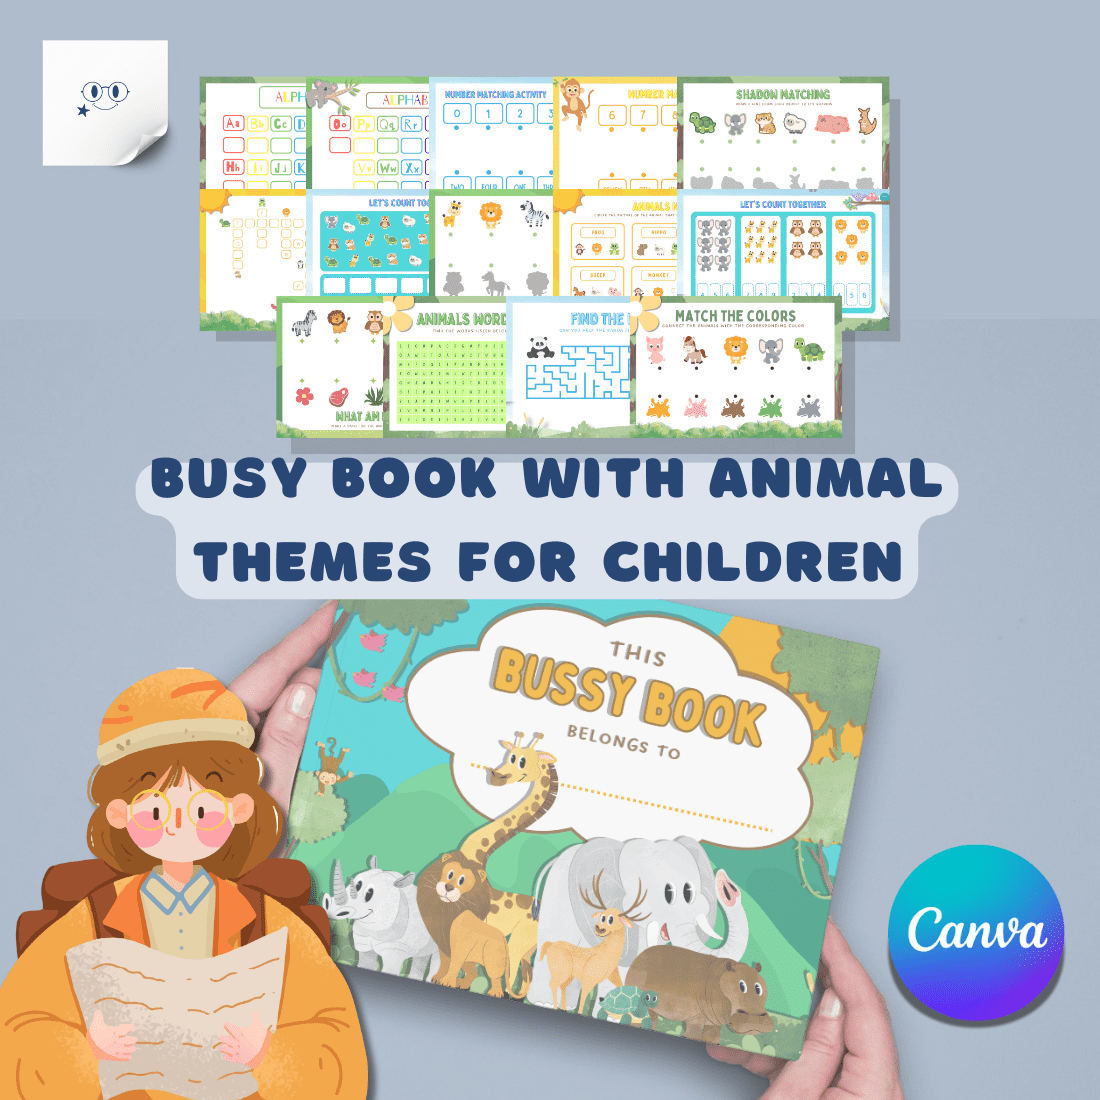 Busy Book With An Animal Theme for Children - Only 8 preview image.